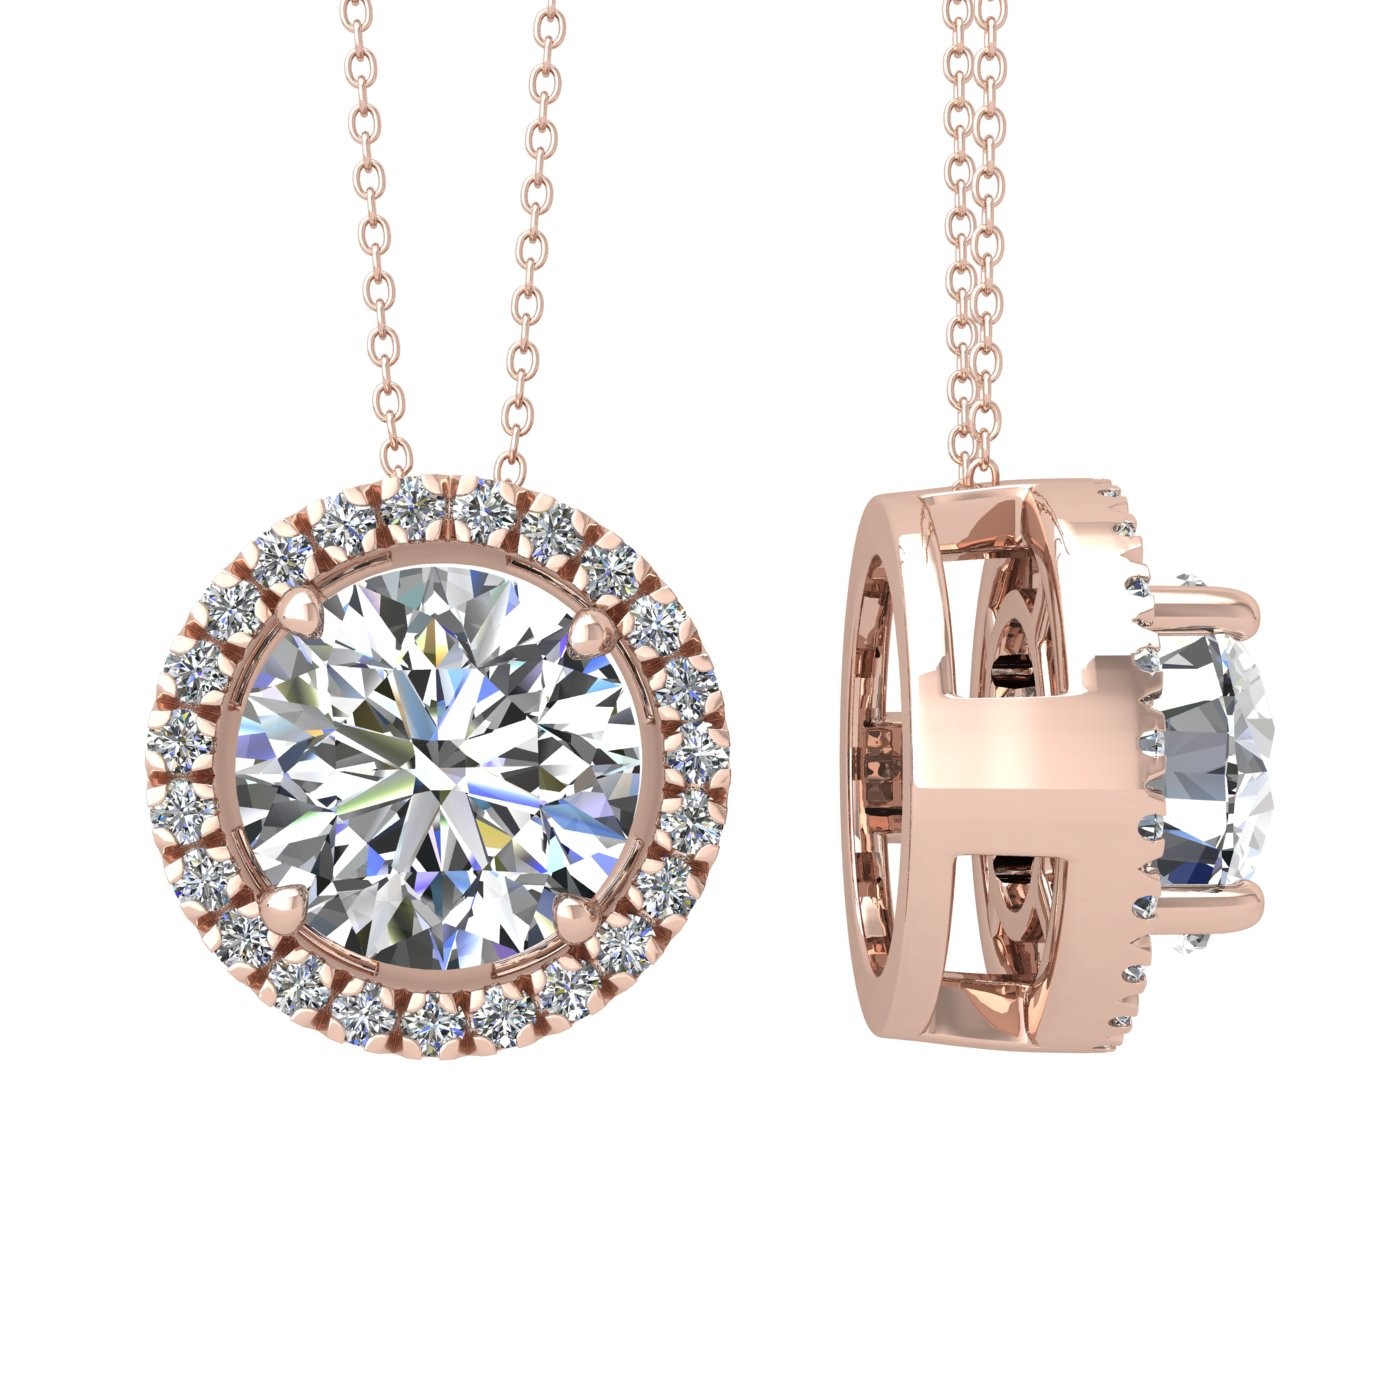 18k rose gold  0,7 ct 4 prong round shape diamond pendant with diamond pavÉ set halo including chain seperate from the pendant Photos & images